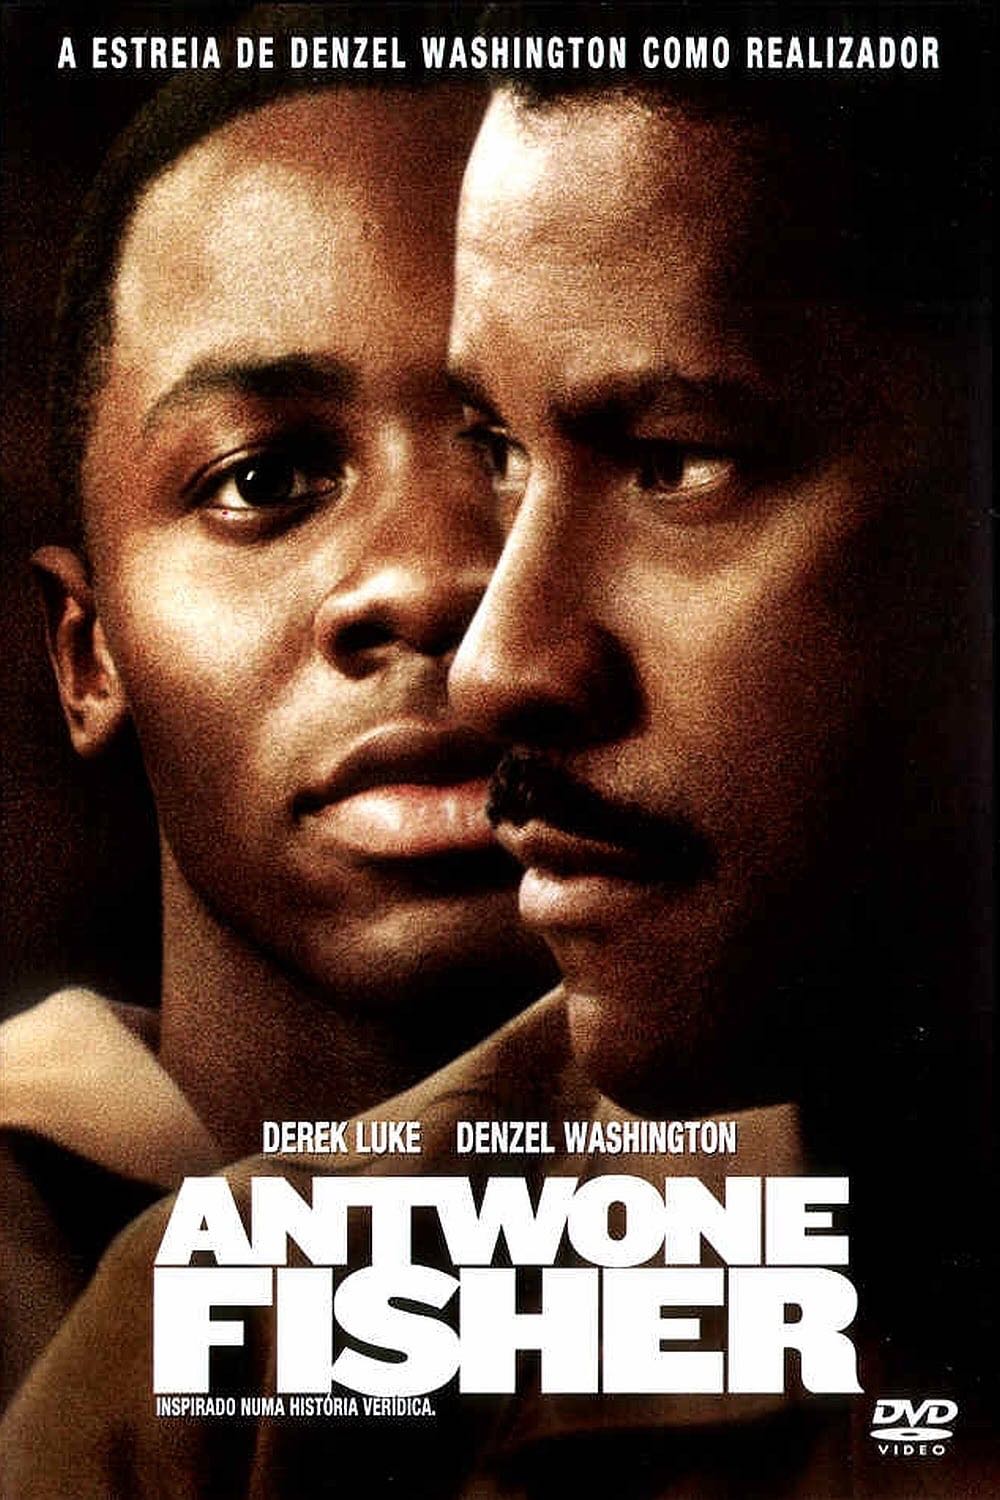 Antwone Fisher DVD movie collectible [Barcode 024543077060] - Main Image 3